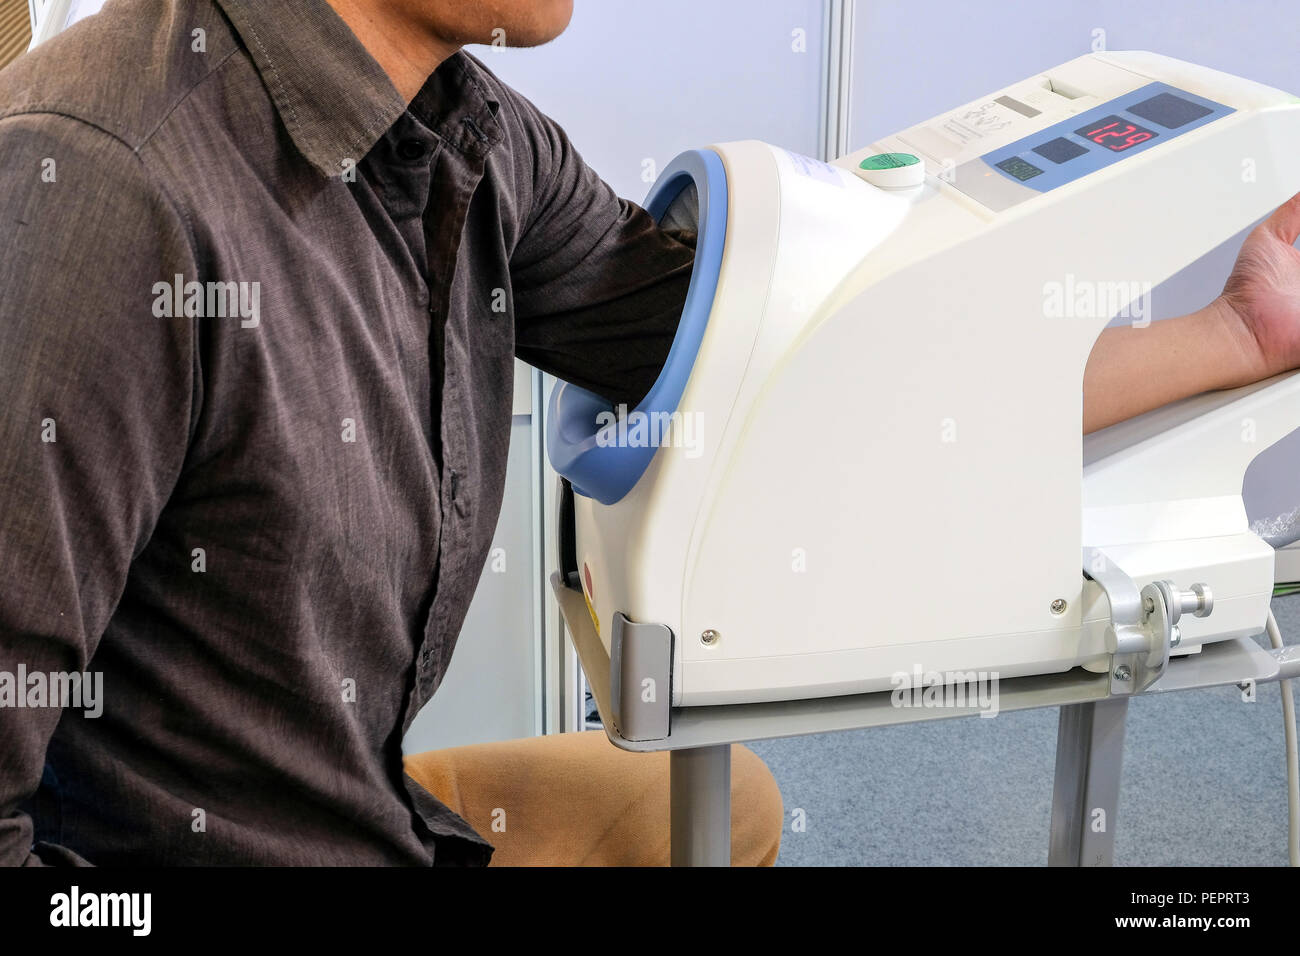 Male patients insert their left arm into the pressure monitor. To check the blood pressure and heart rate. Stock Photo